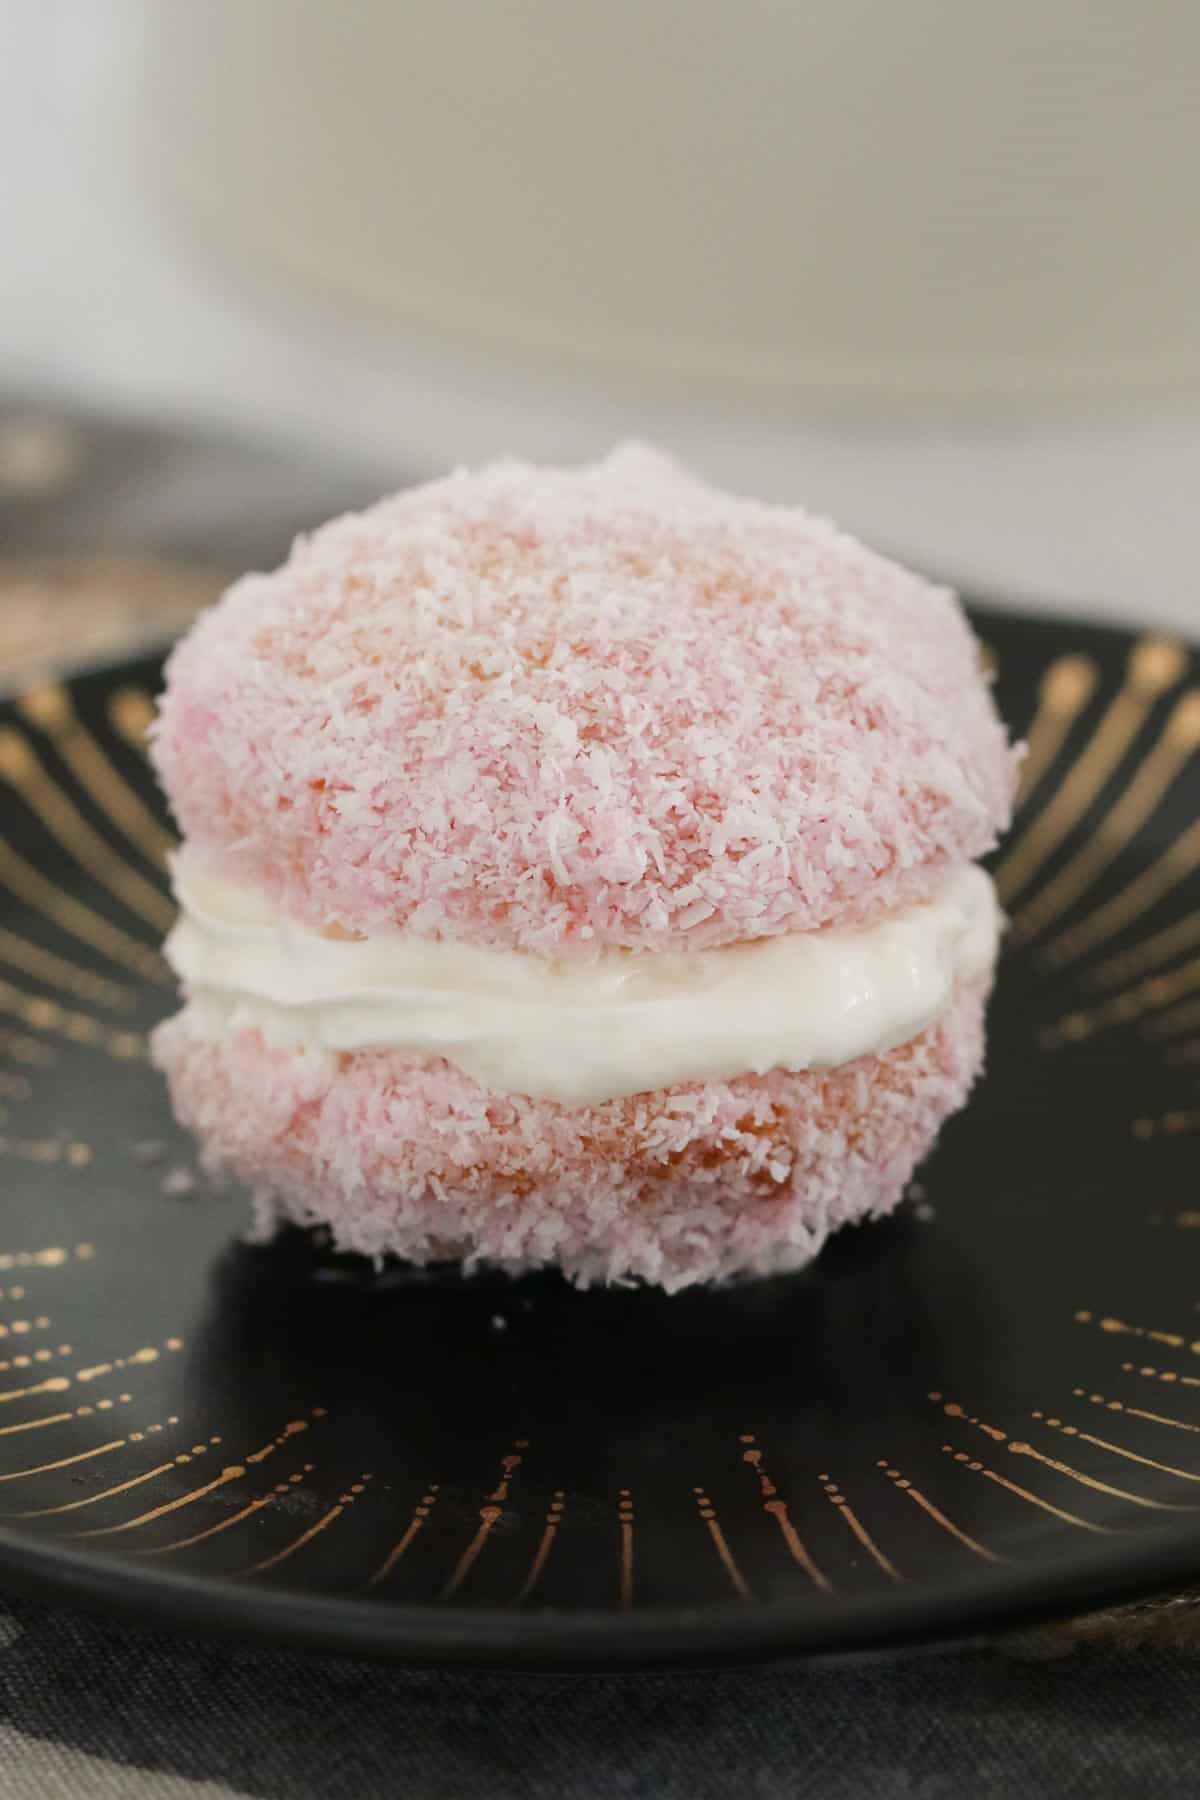 A jelly cake coated in coconut and filled with whipped cream.